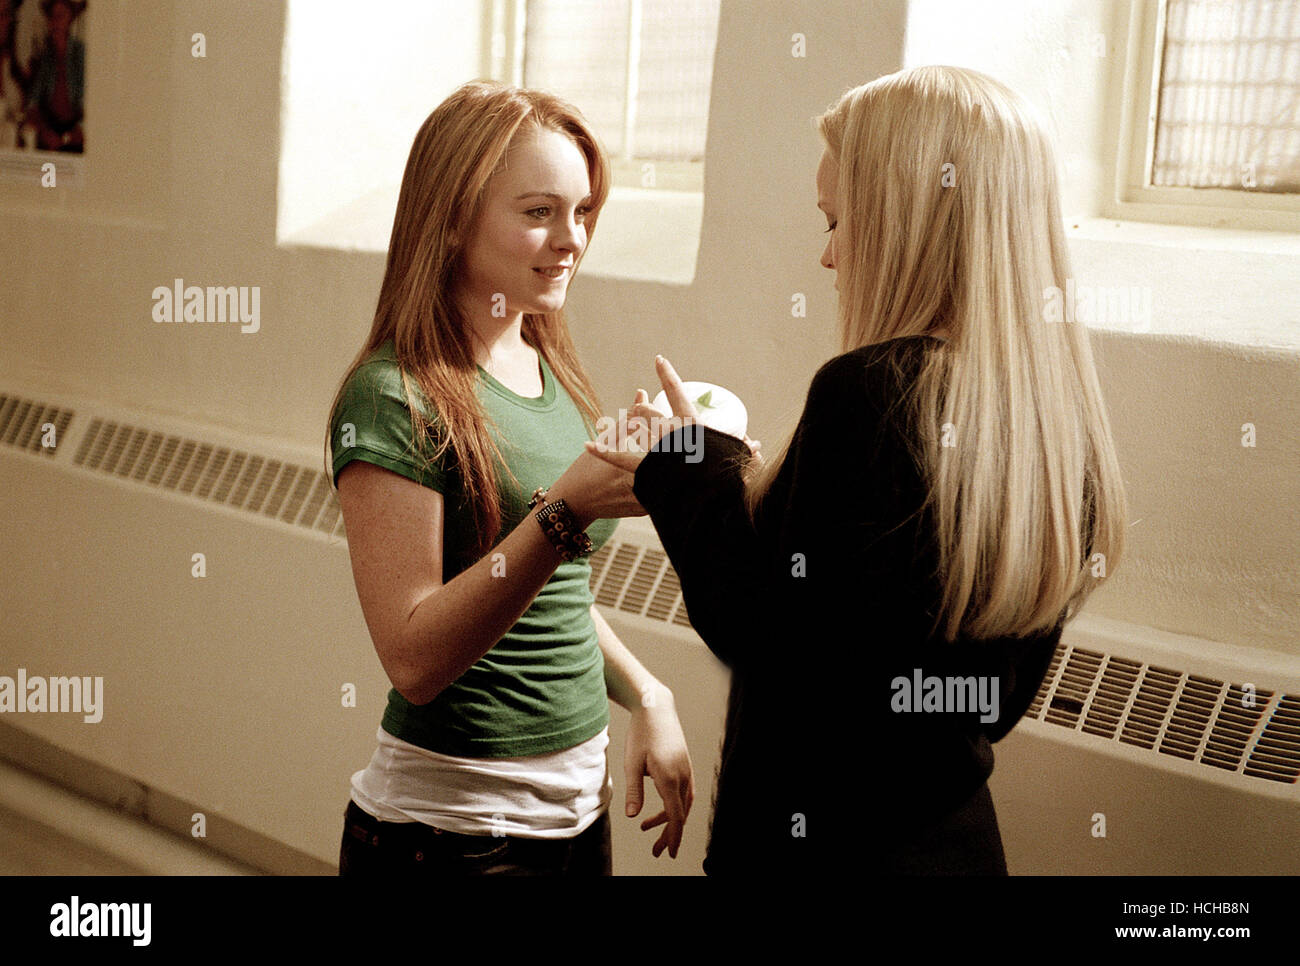 Rachel McAdams And Lindsay Lohan Said This About Possible 'Mean